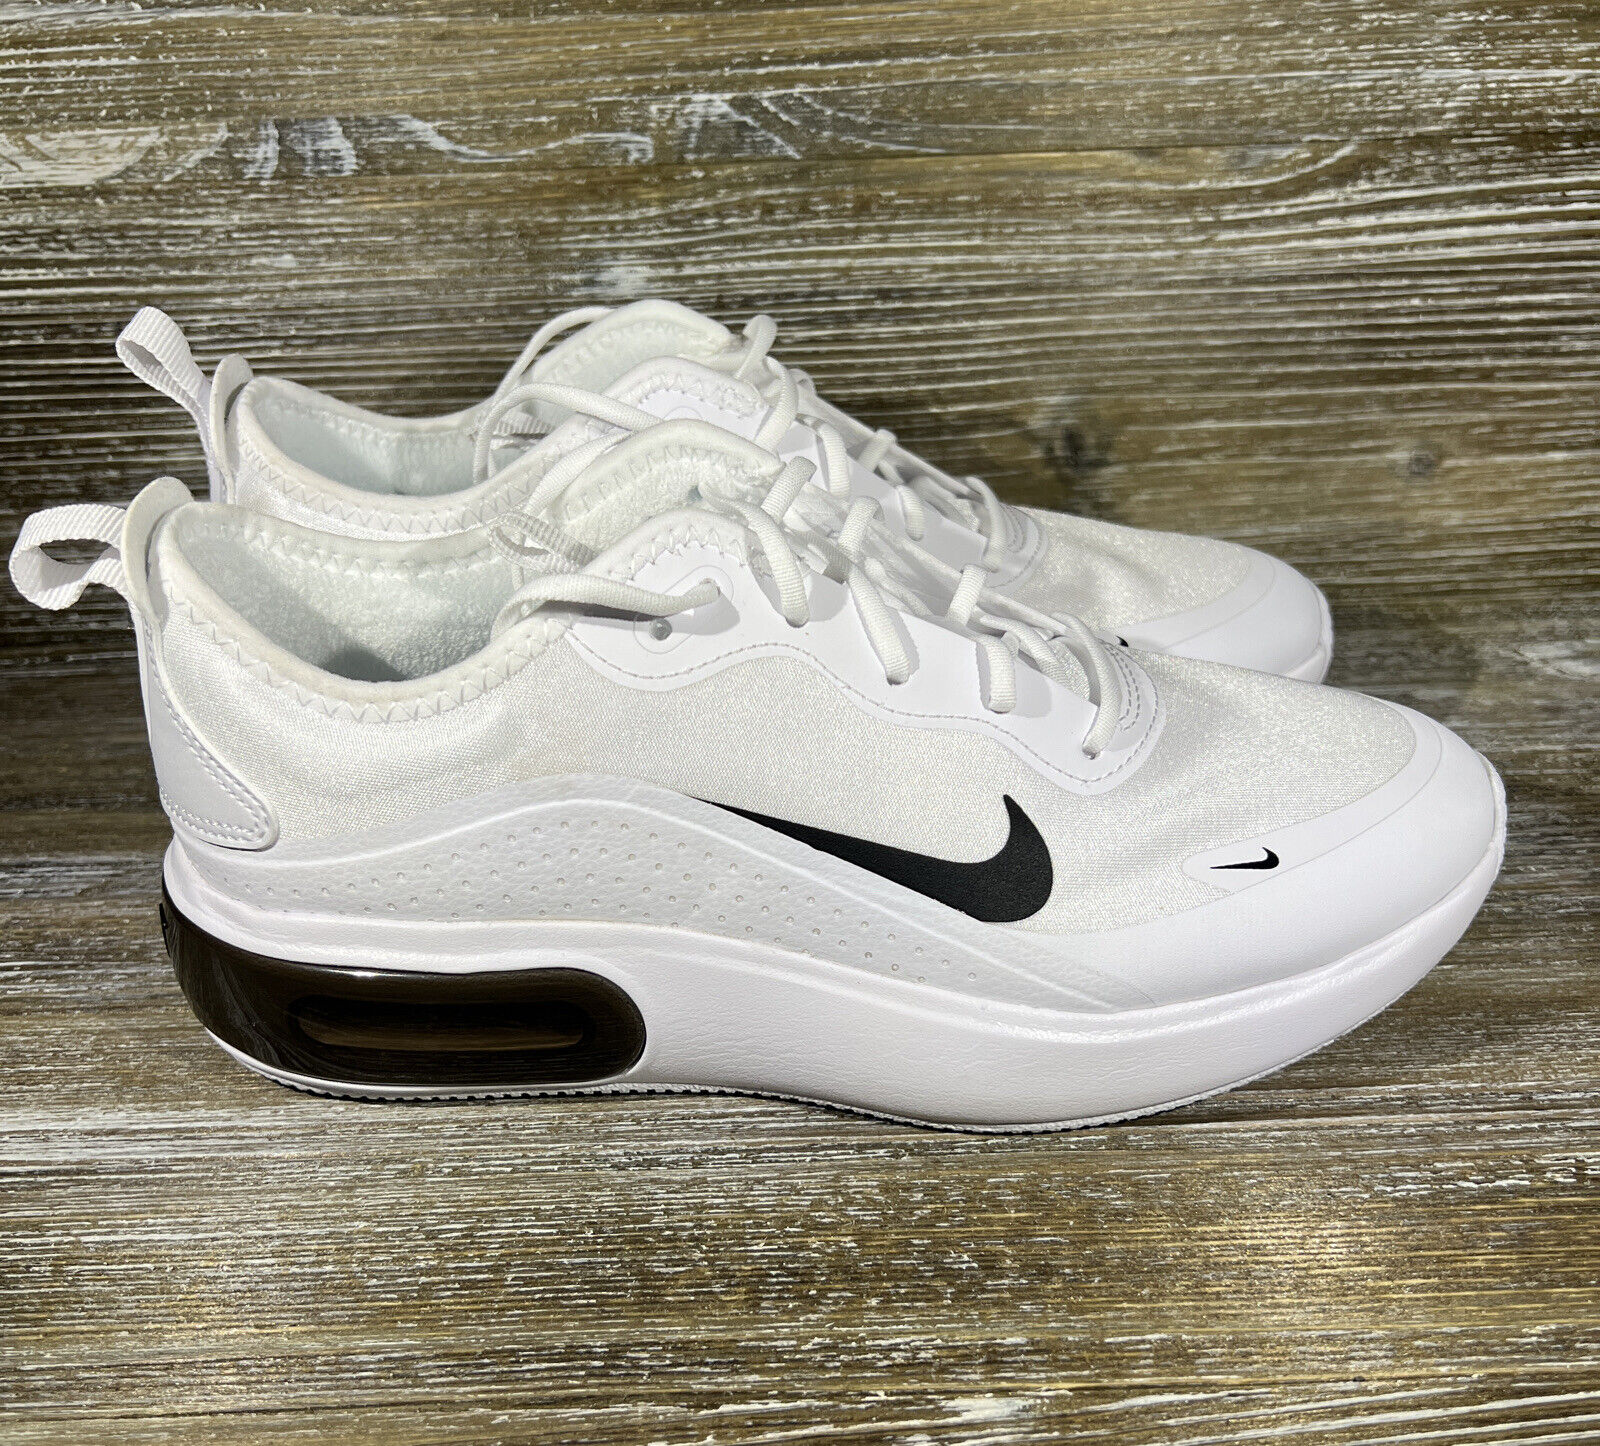 Nike Womens Air Max Dia Running Shoes White CI3898-100 Low Top Sneakers  7.5M New